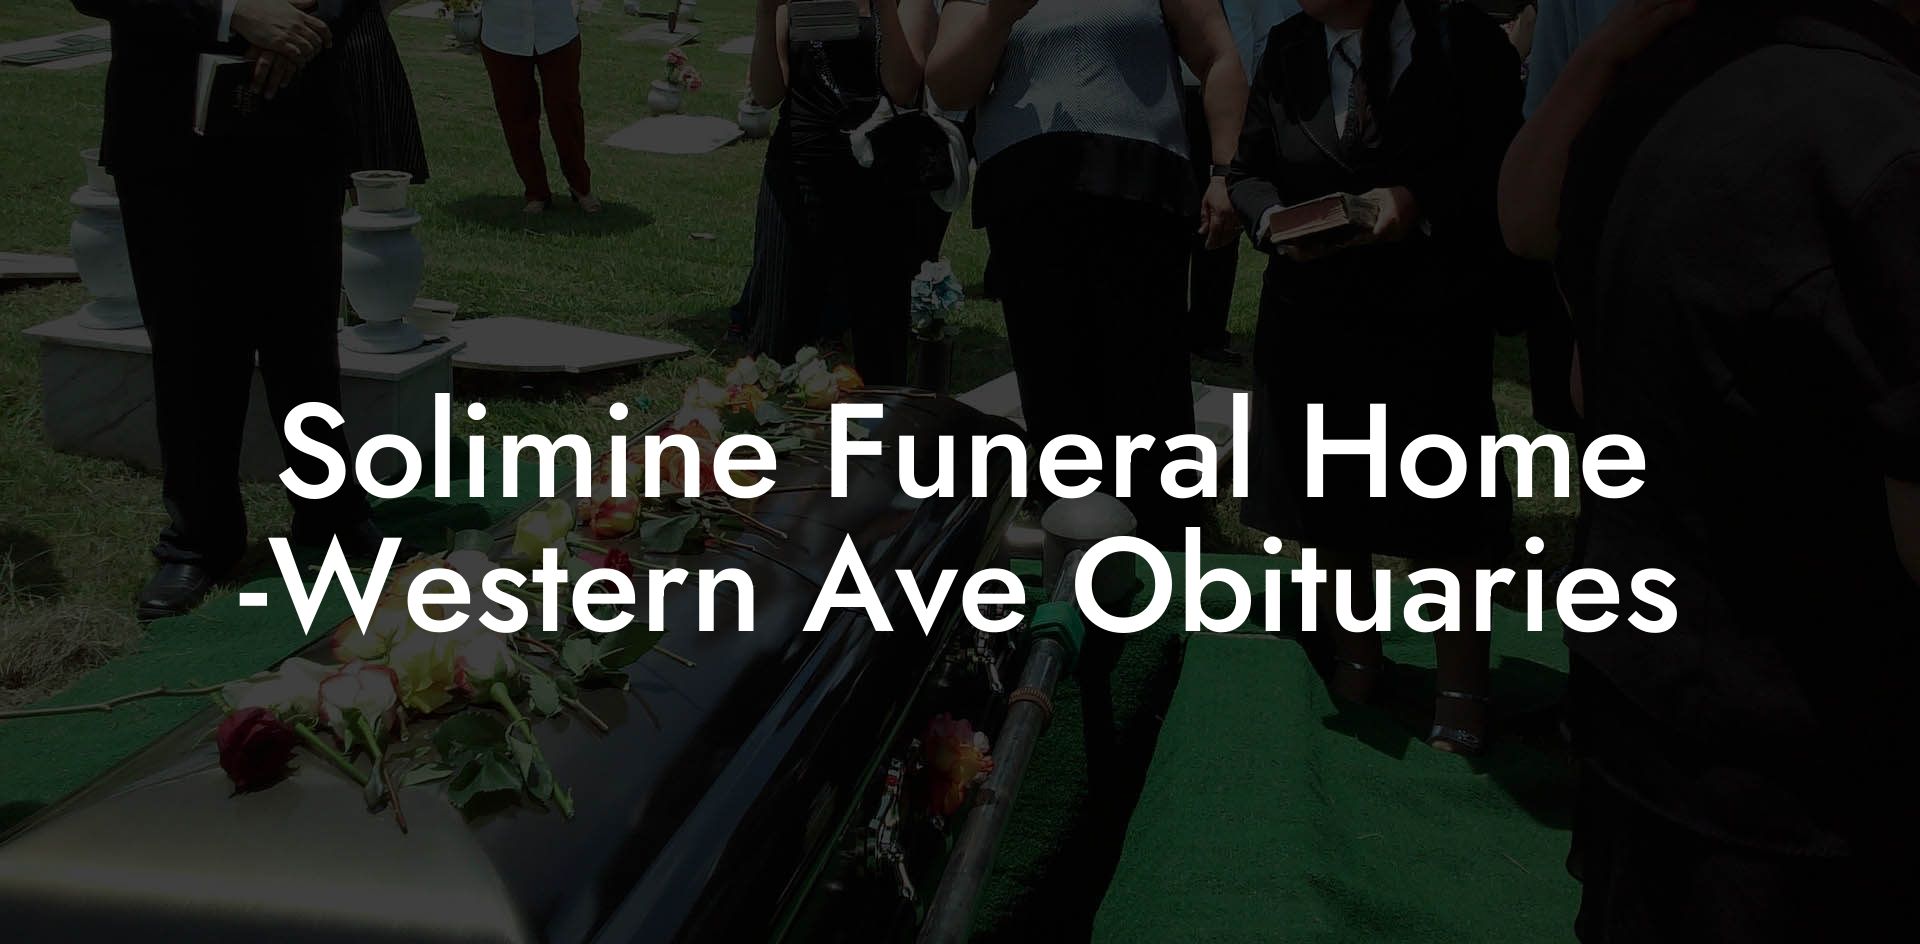 Solimine Funeral Home -Western Ave Obituaries